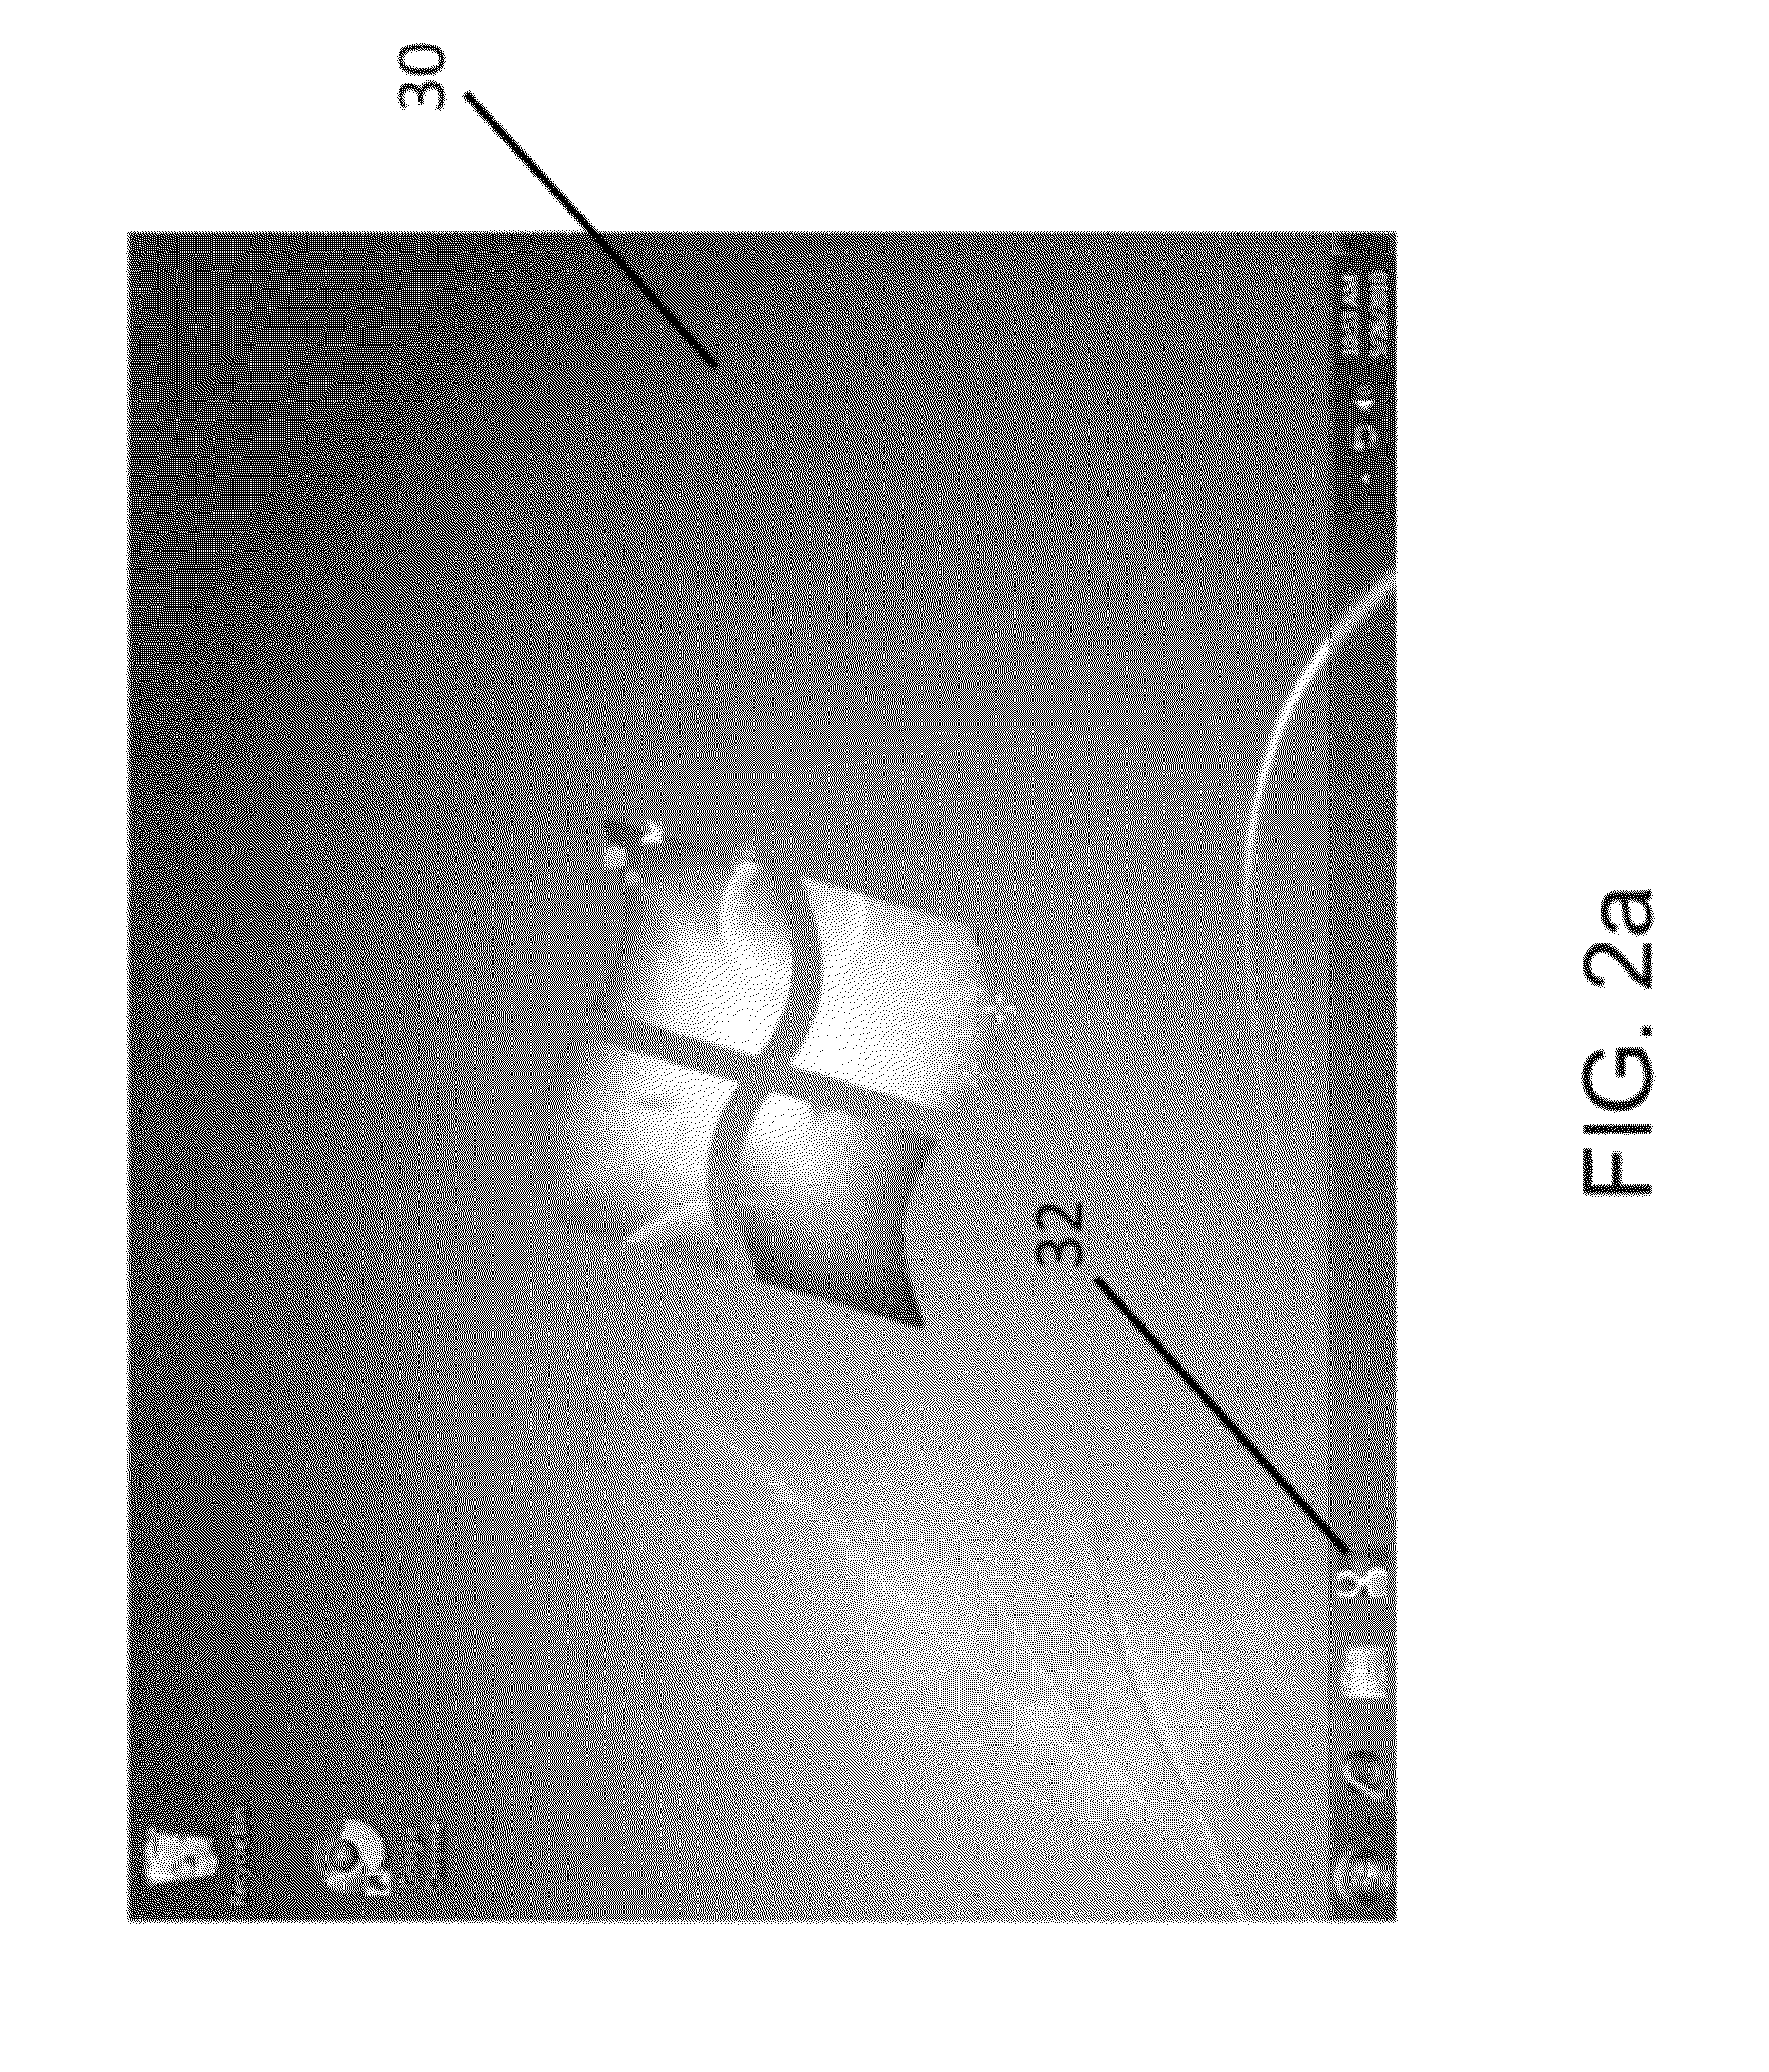 System and Methods for Integration of an Application Runtime Environment Into a User Computing Environment